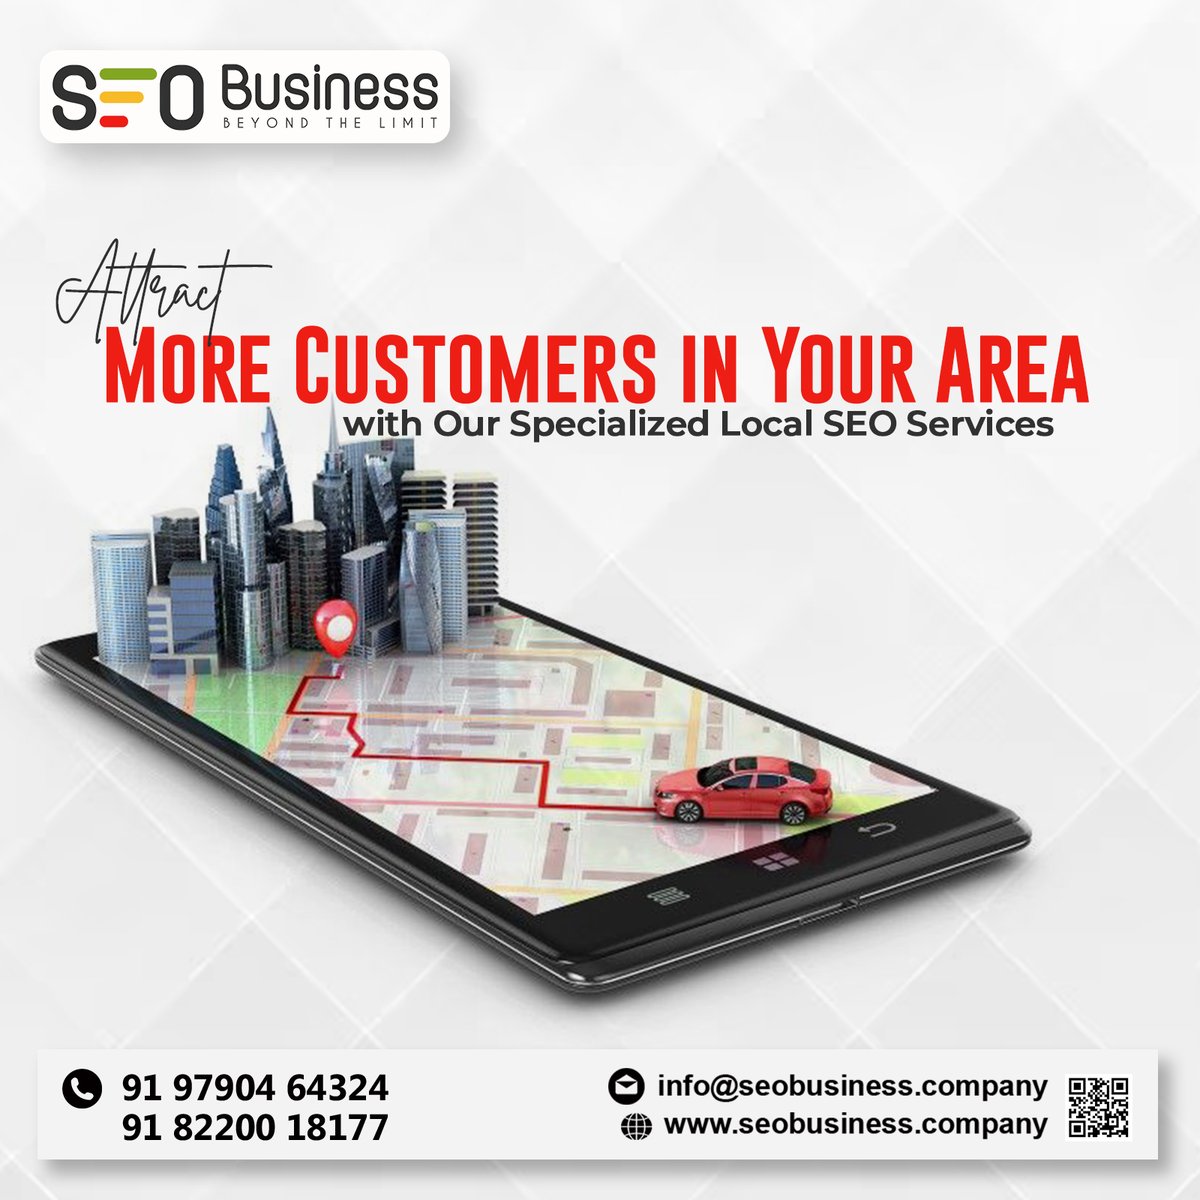 Boost Your Local Visibility with Expert Local SEO Services🤩

#seobusinesscompany #seoservices #localseo #localseotips #localseorank #localseoagency #localseoexpert #localseocompany #localseoservices #localseomarketing #Flipkart #Chennai #Nifty #Trending